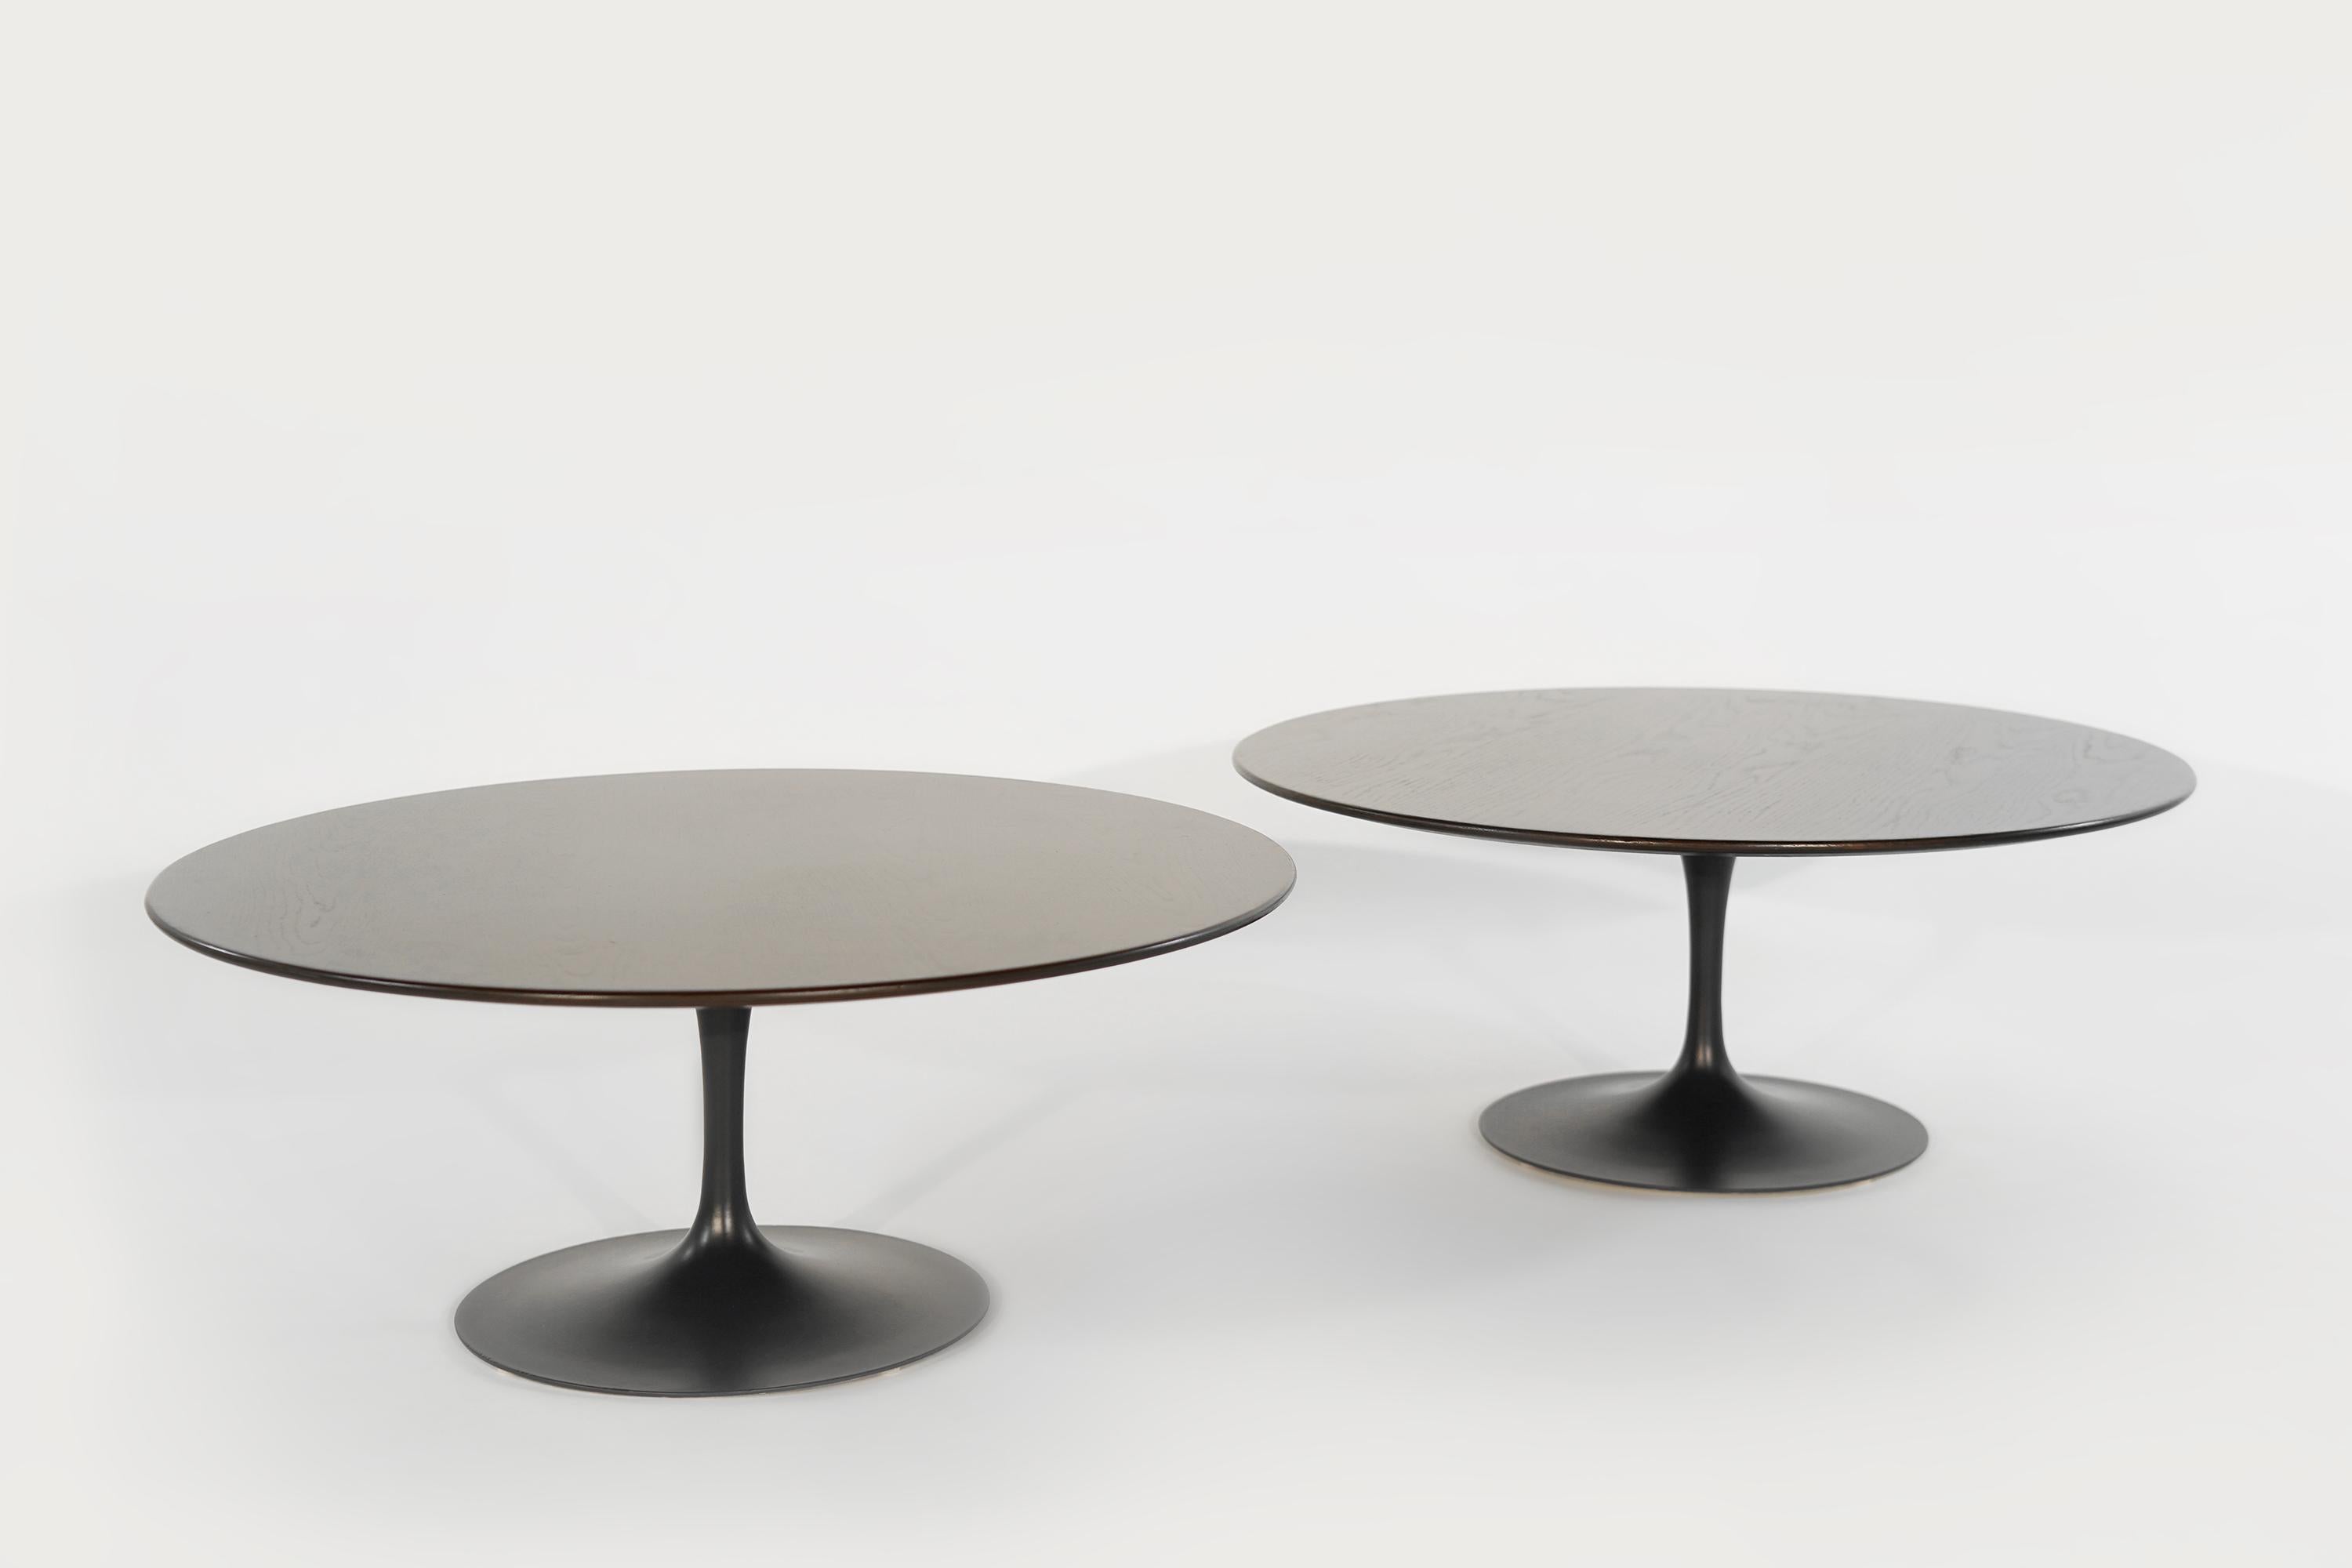 Beautiful and rare matched set of coffee tables designed by Eero Saarinen for Knoll, circa 1960s. Featuring newly refinished 36-inch oak tops and cast iron bases redone in matt black. Priced individually.